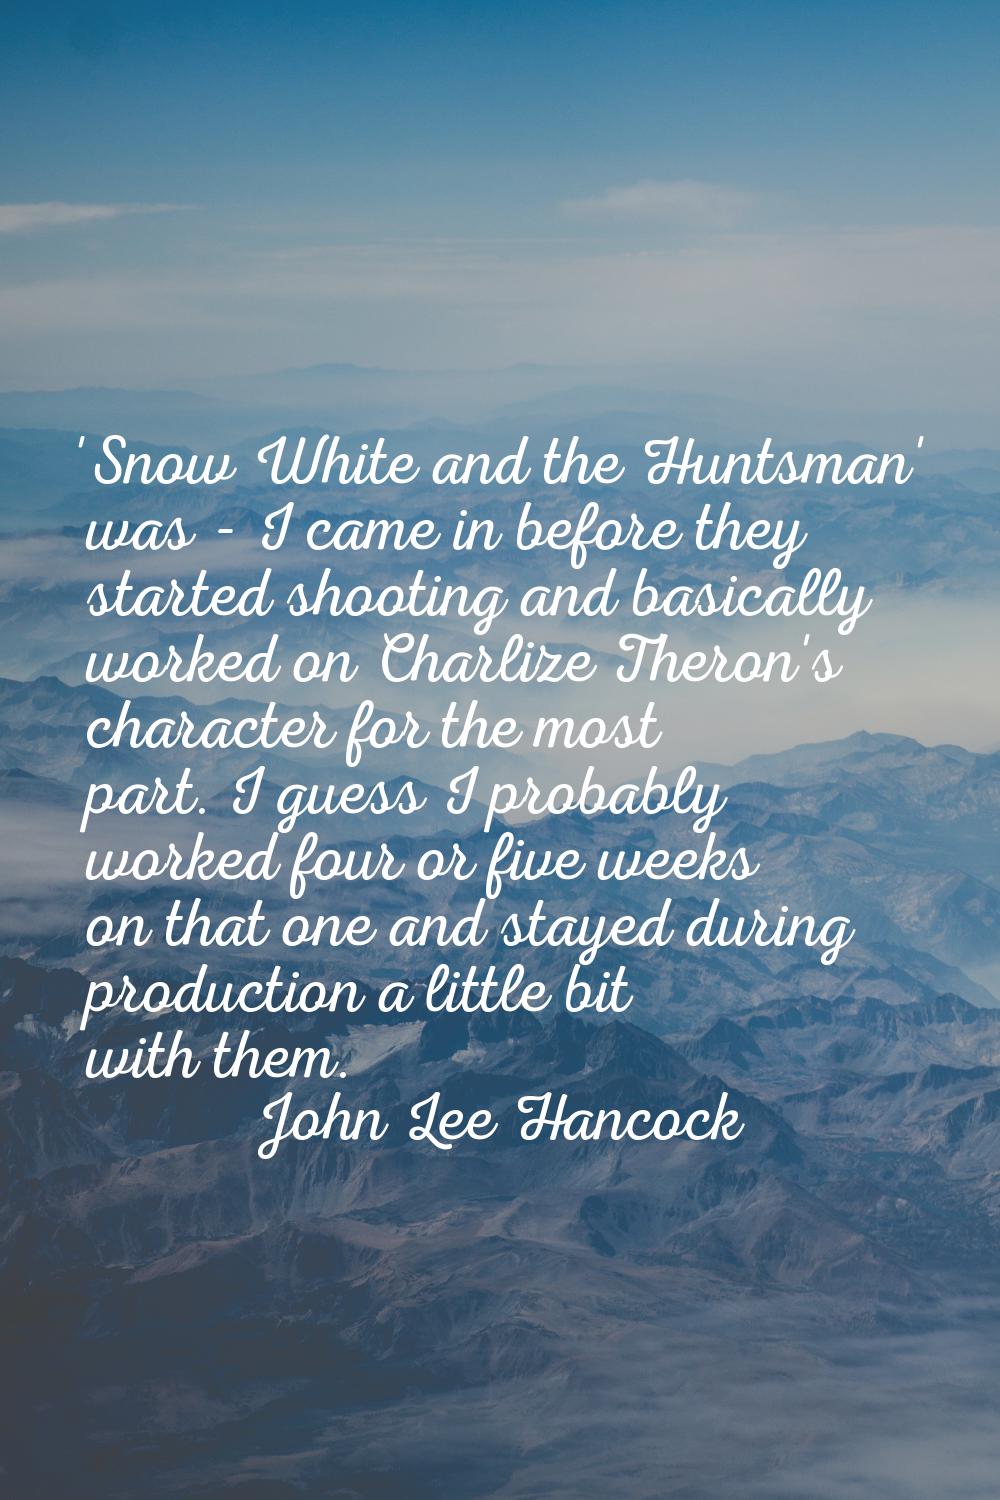 'Snow White and the Huntsman' was - I came in before they started shooting and basically worked on 